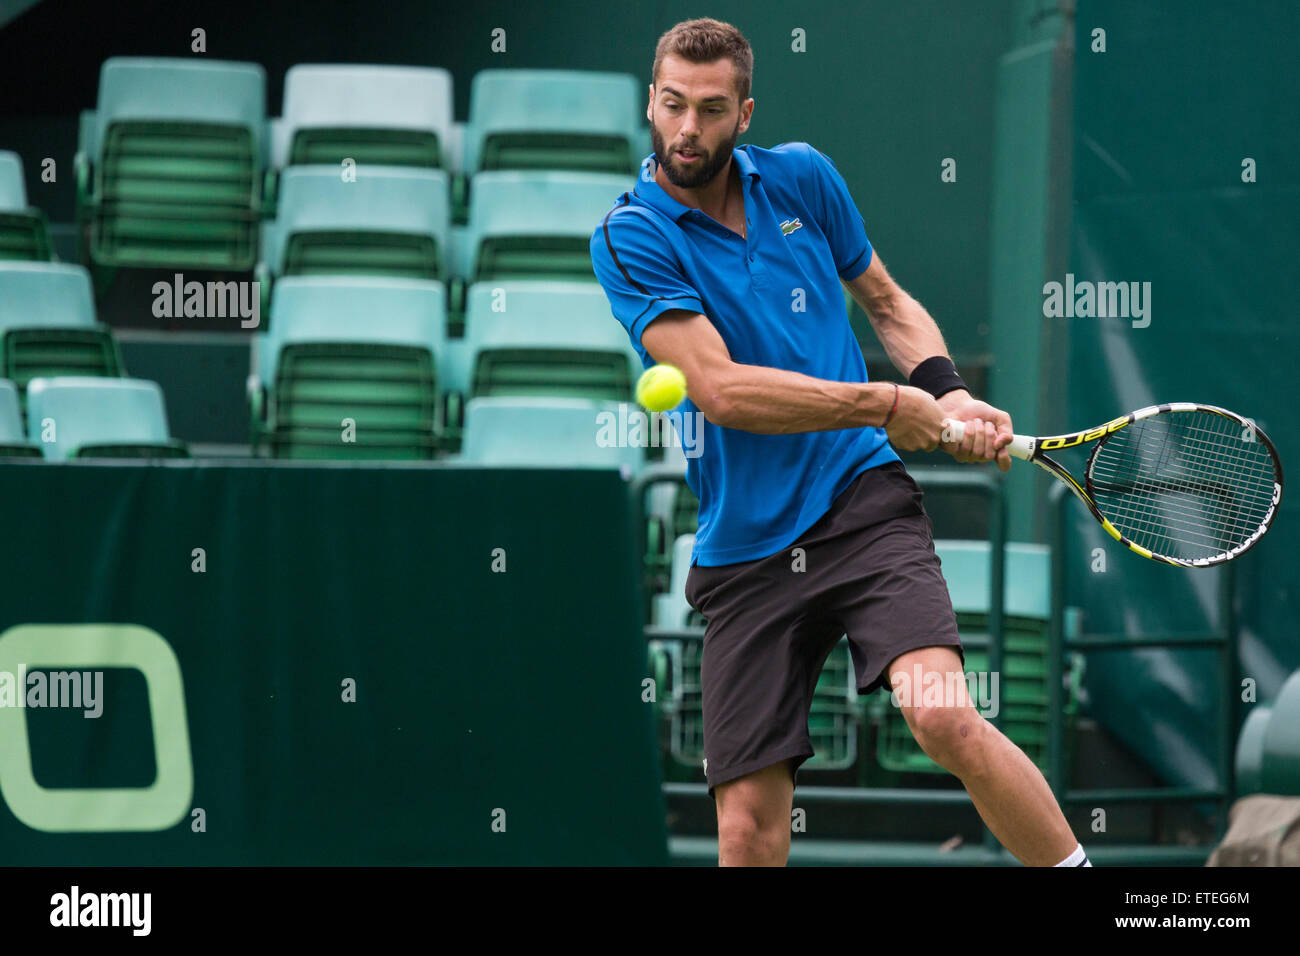 Halle, Germany. 13th June, 2015. Benoit Paire (FR) returns a shot in the qualifying rounds of the ATP Gerry Weber Open Tennis Championships at Halle, Germany. Credit:  Gruffydd Thomas/Alamy Live News Stock Photo